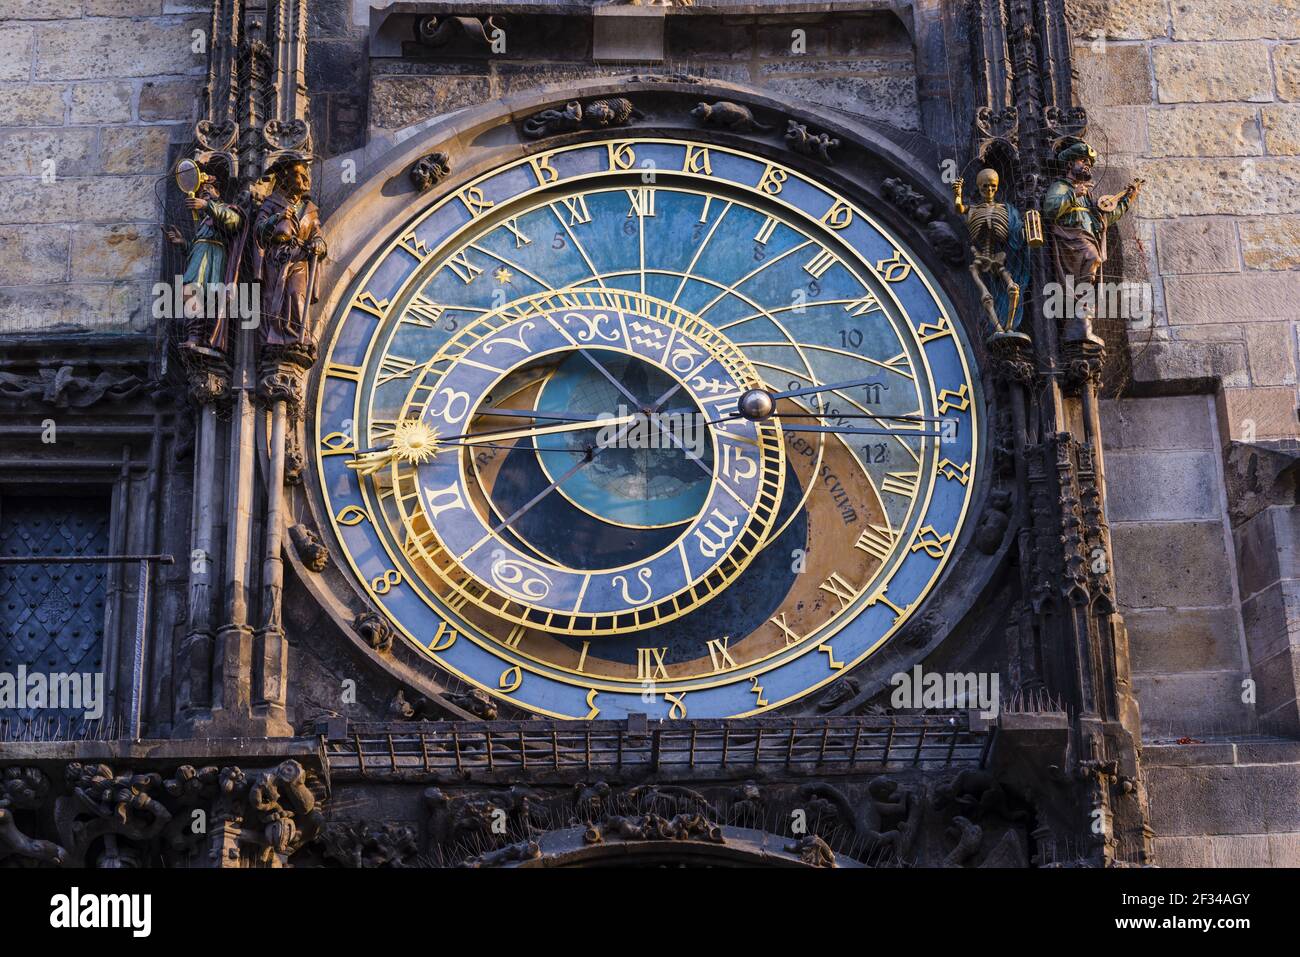 geography / travel, Czechia, Bohemia, astronomic timepiece at city hall tower, Old Town Square, old town, Prague, Czechia, Freedom-Of-Panorama Stock Photo